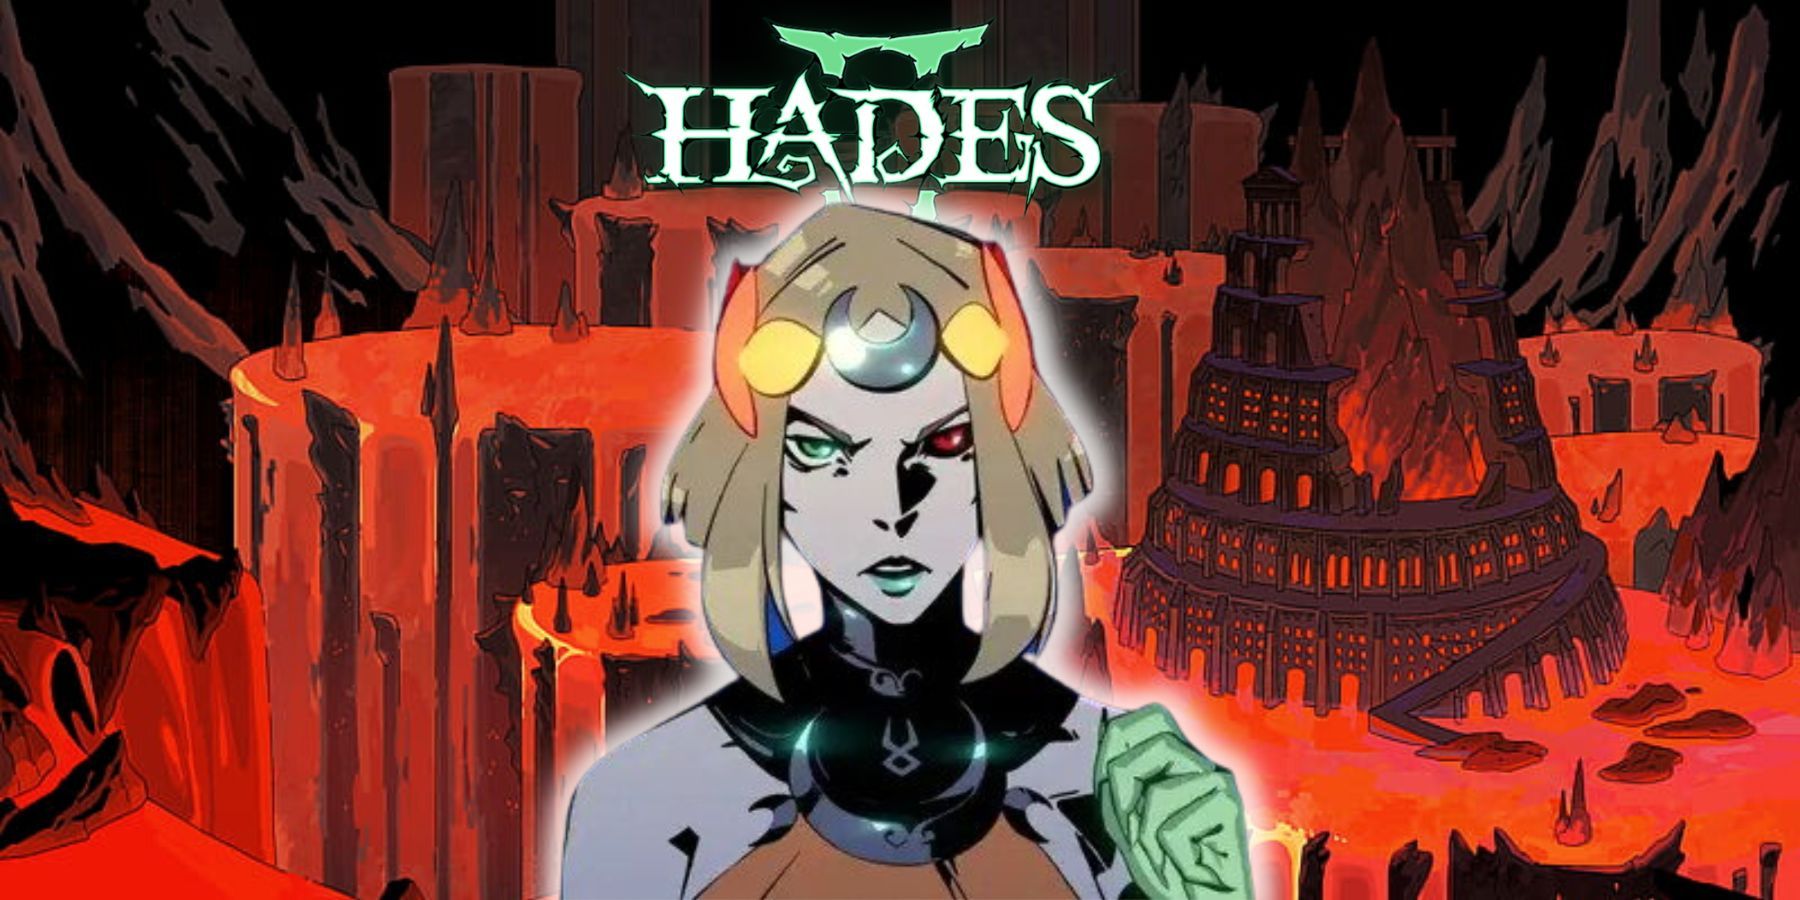 Hades 2' is coming to Early Access in 2023